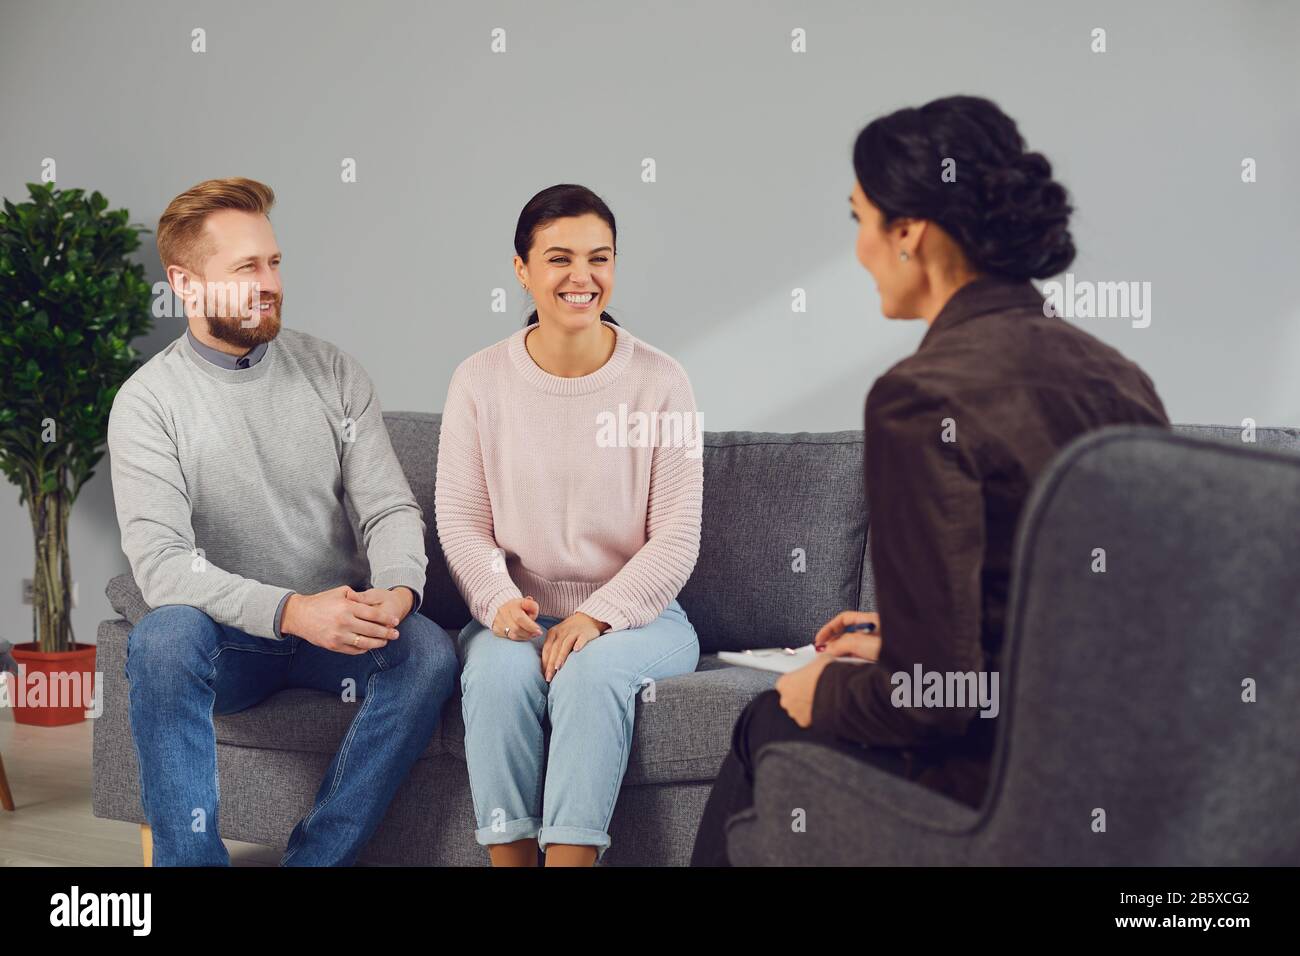 Family psychologist. Female psychologist at a psychotherapy session with family in the office. Stock Photo